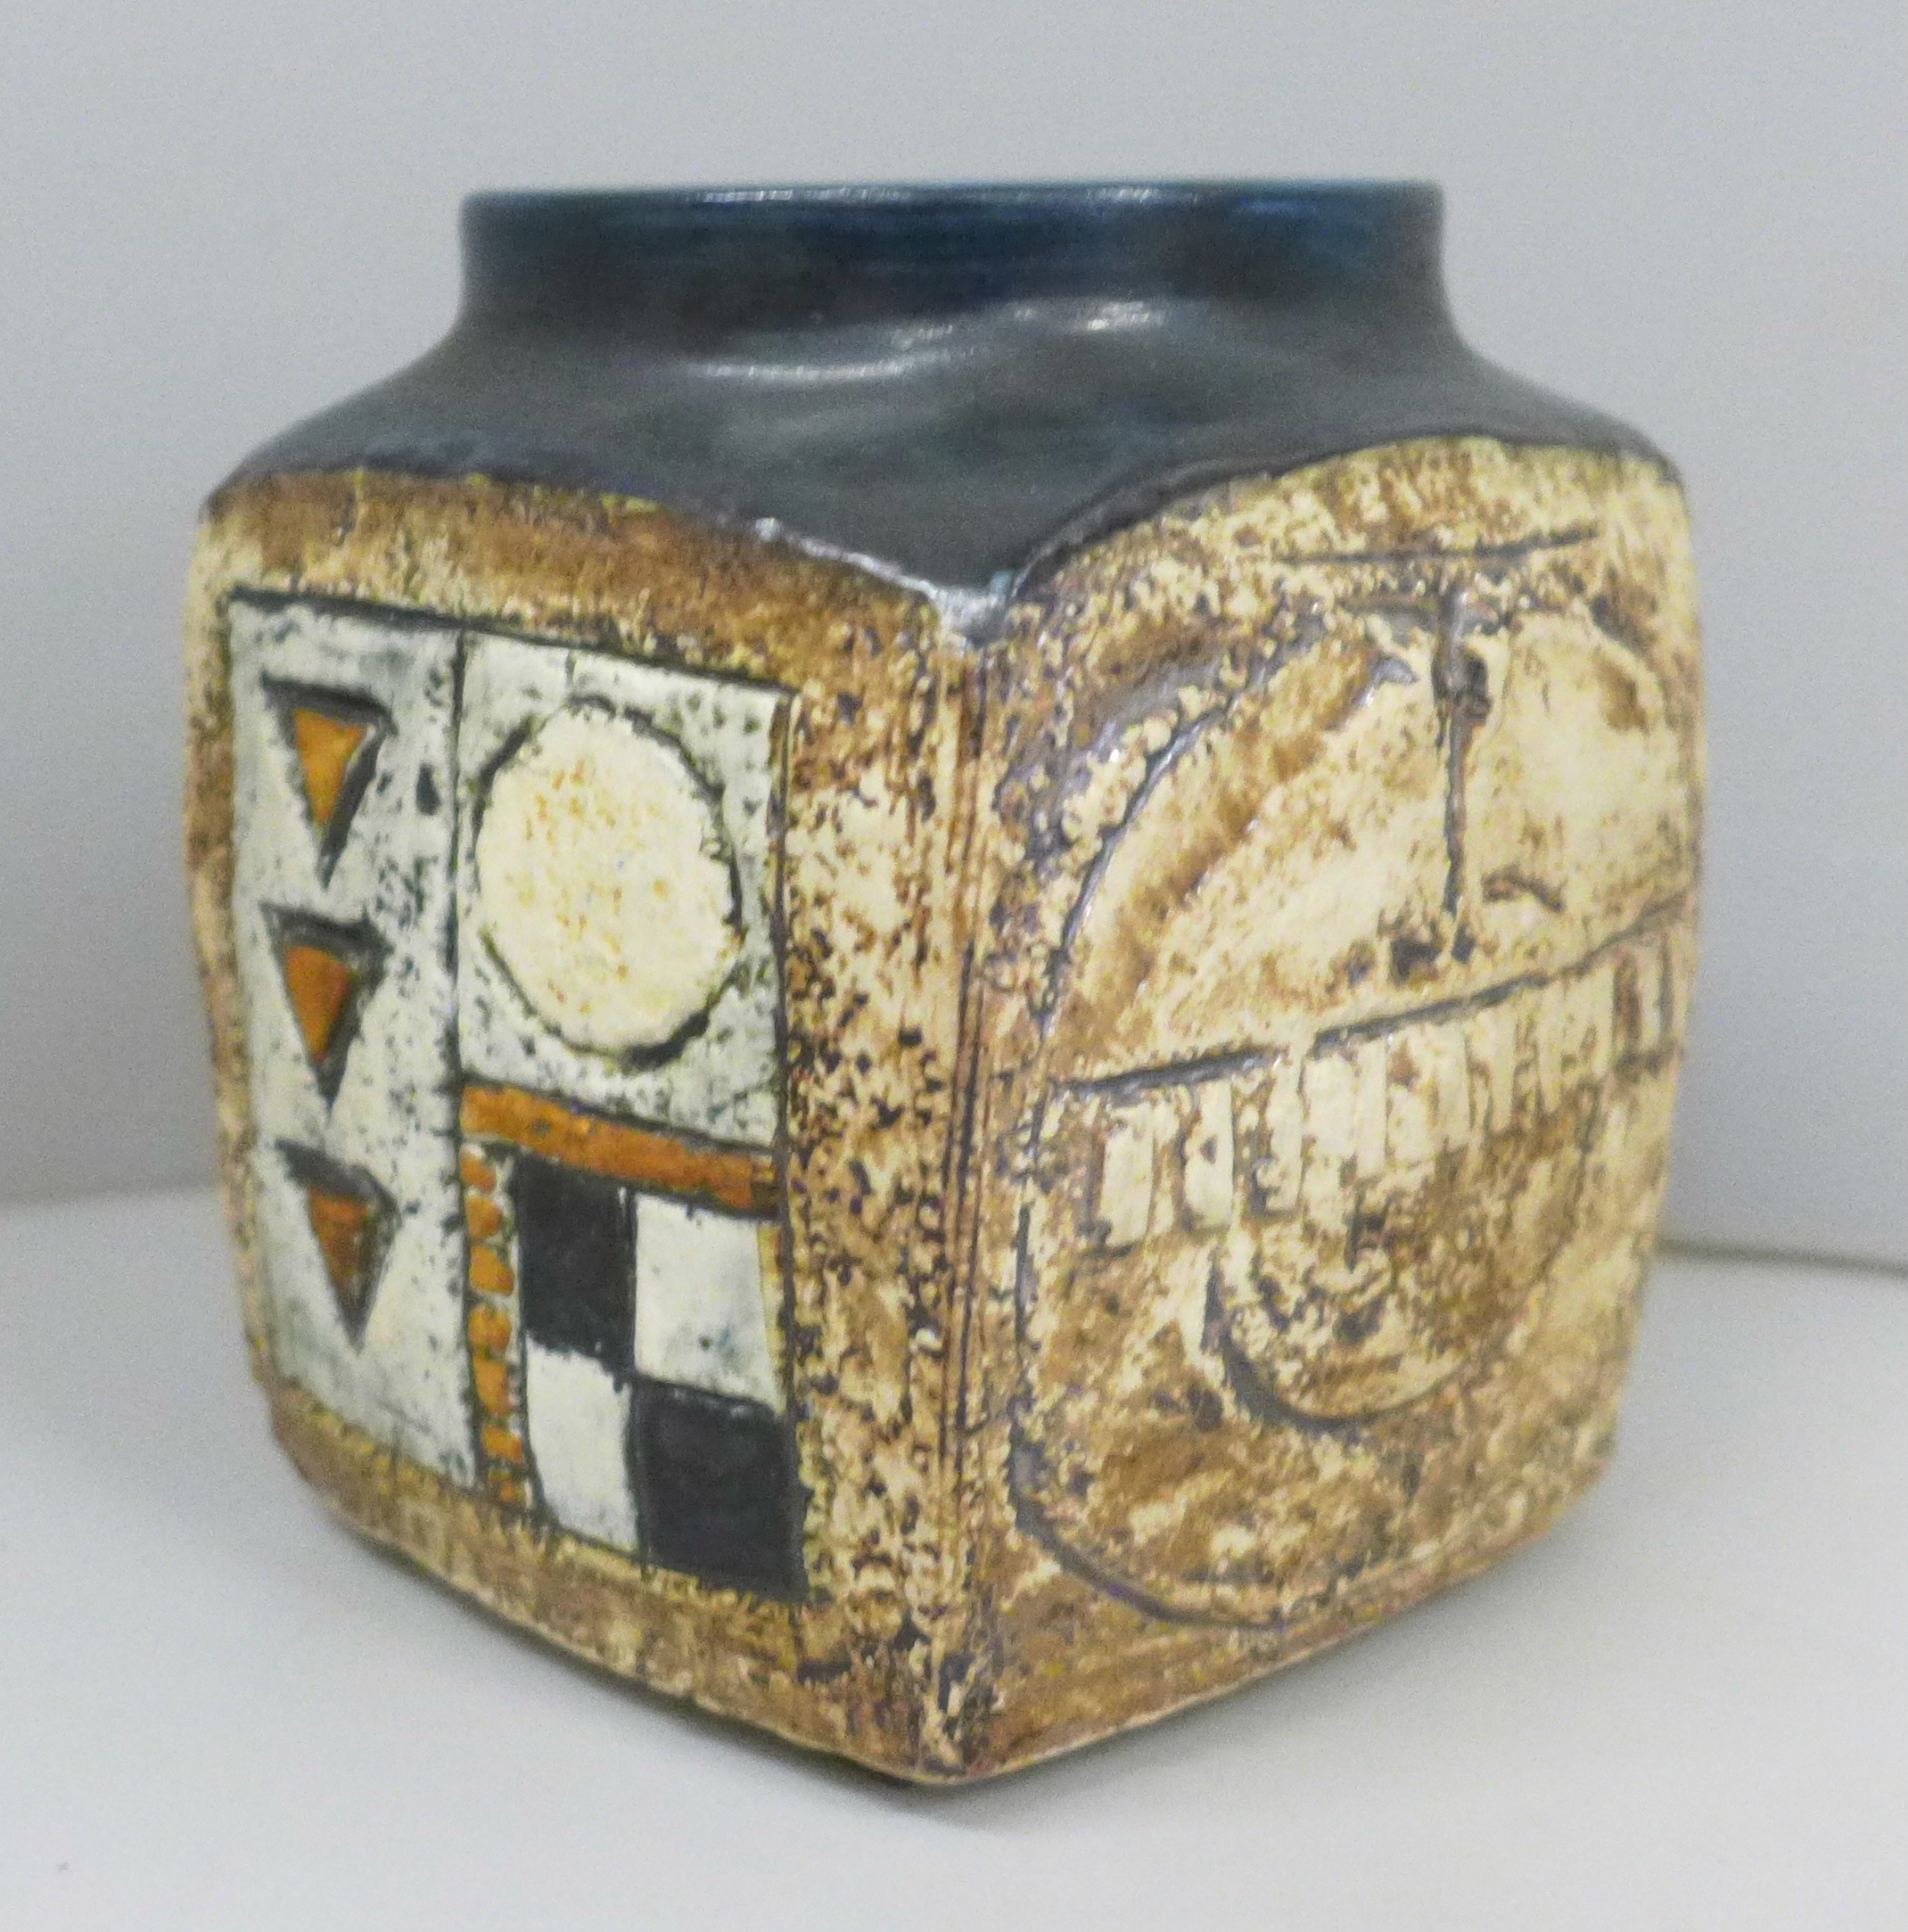 A Troika marmalade jar by Honor Curtis, 10cm - Image 2 of 3